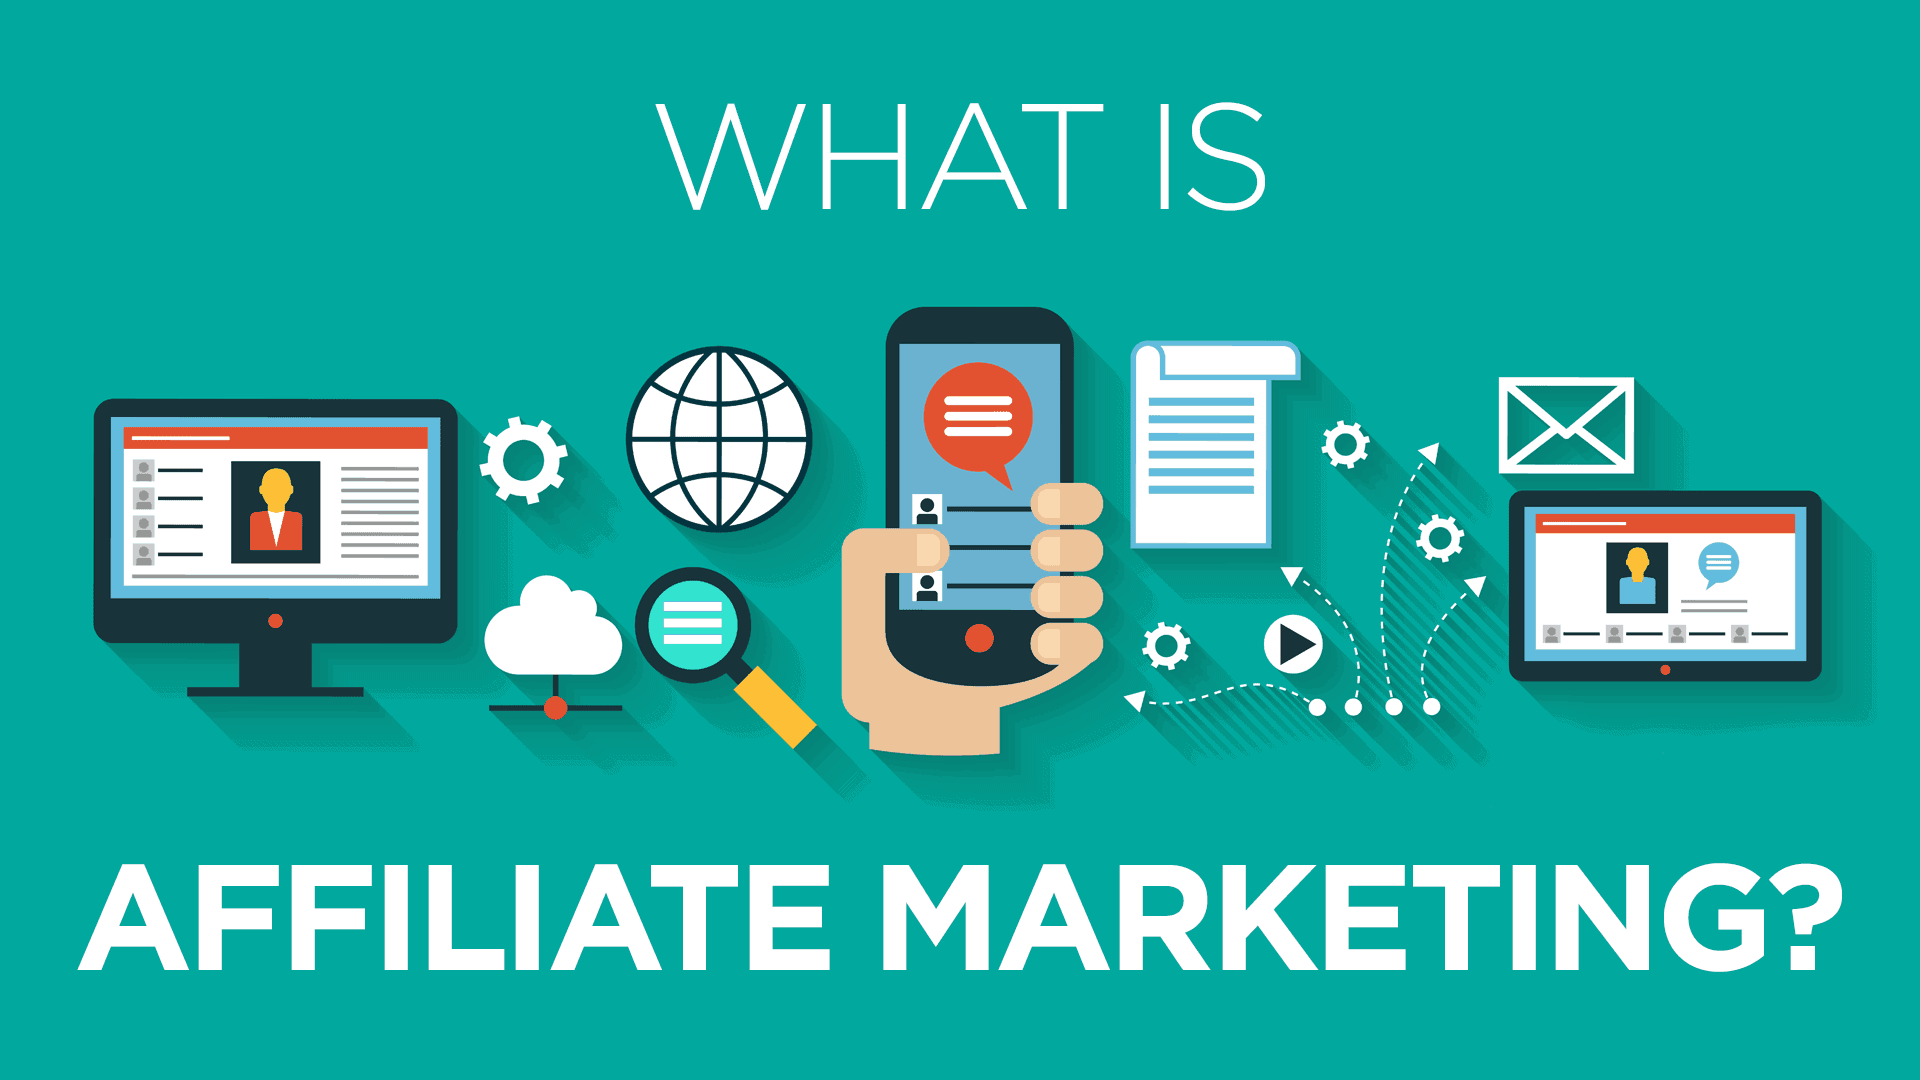 How to build an affiliate marketing business